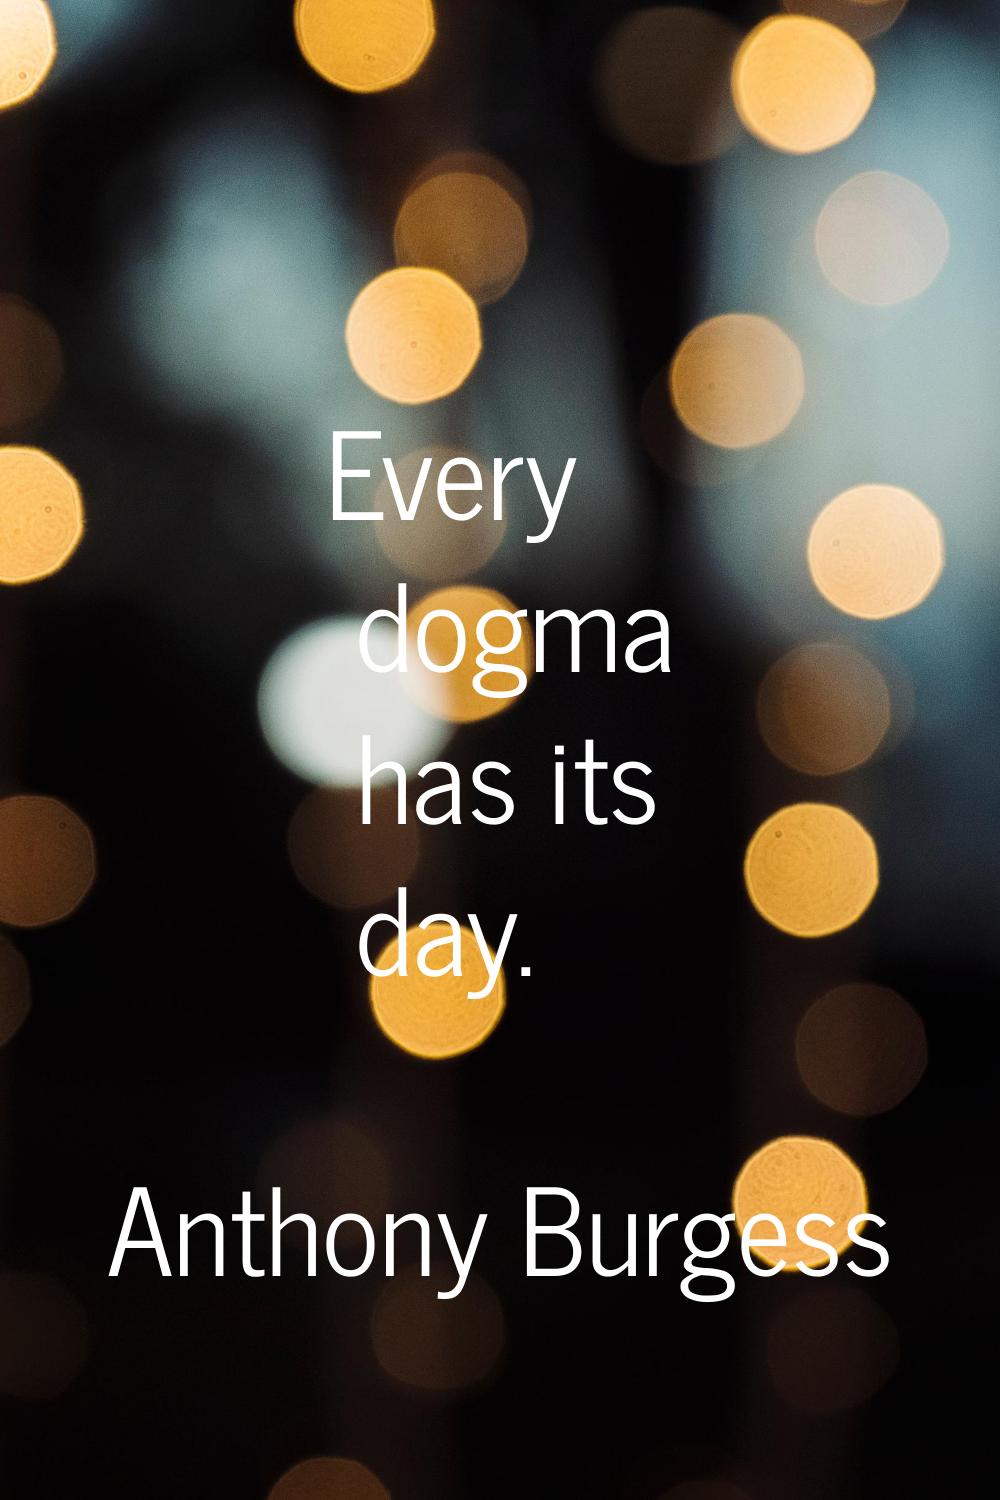 Every dogma has its day.